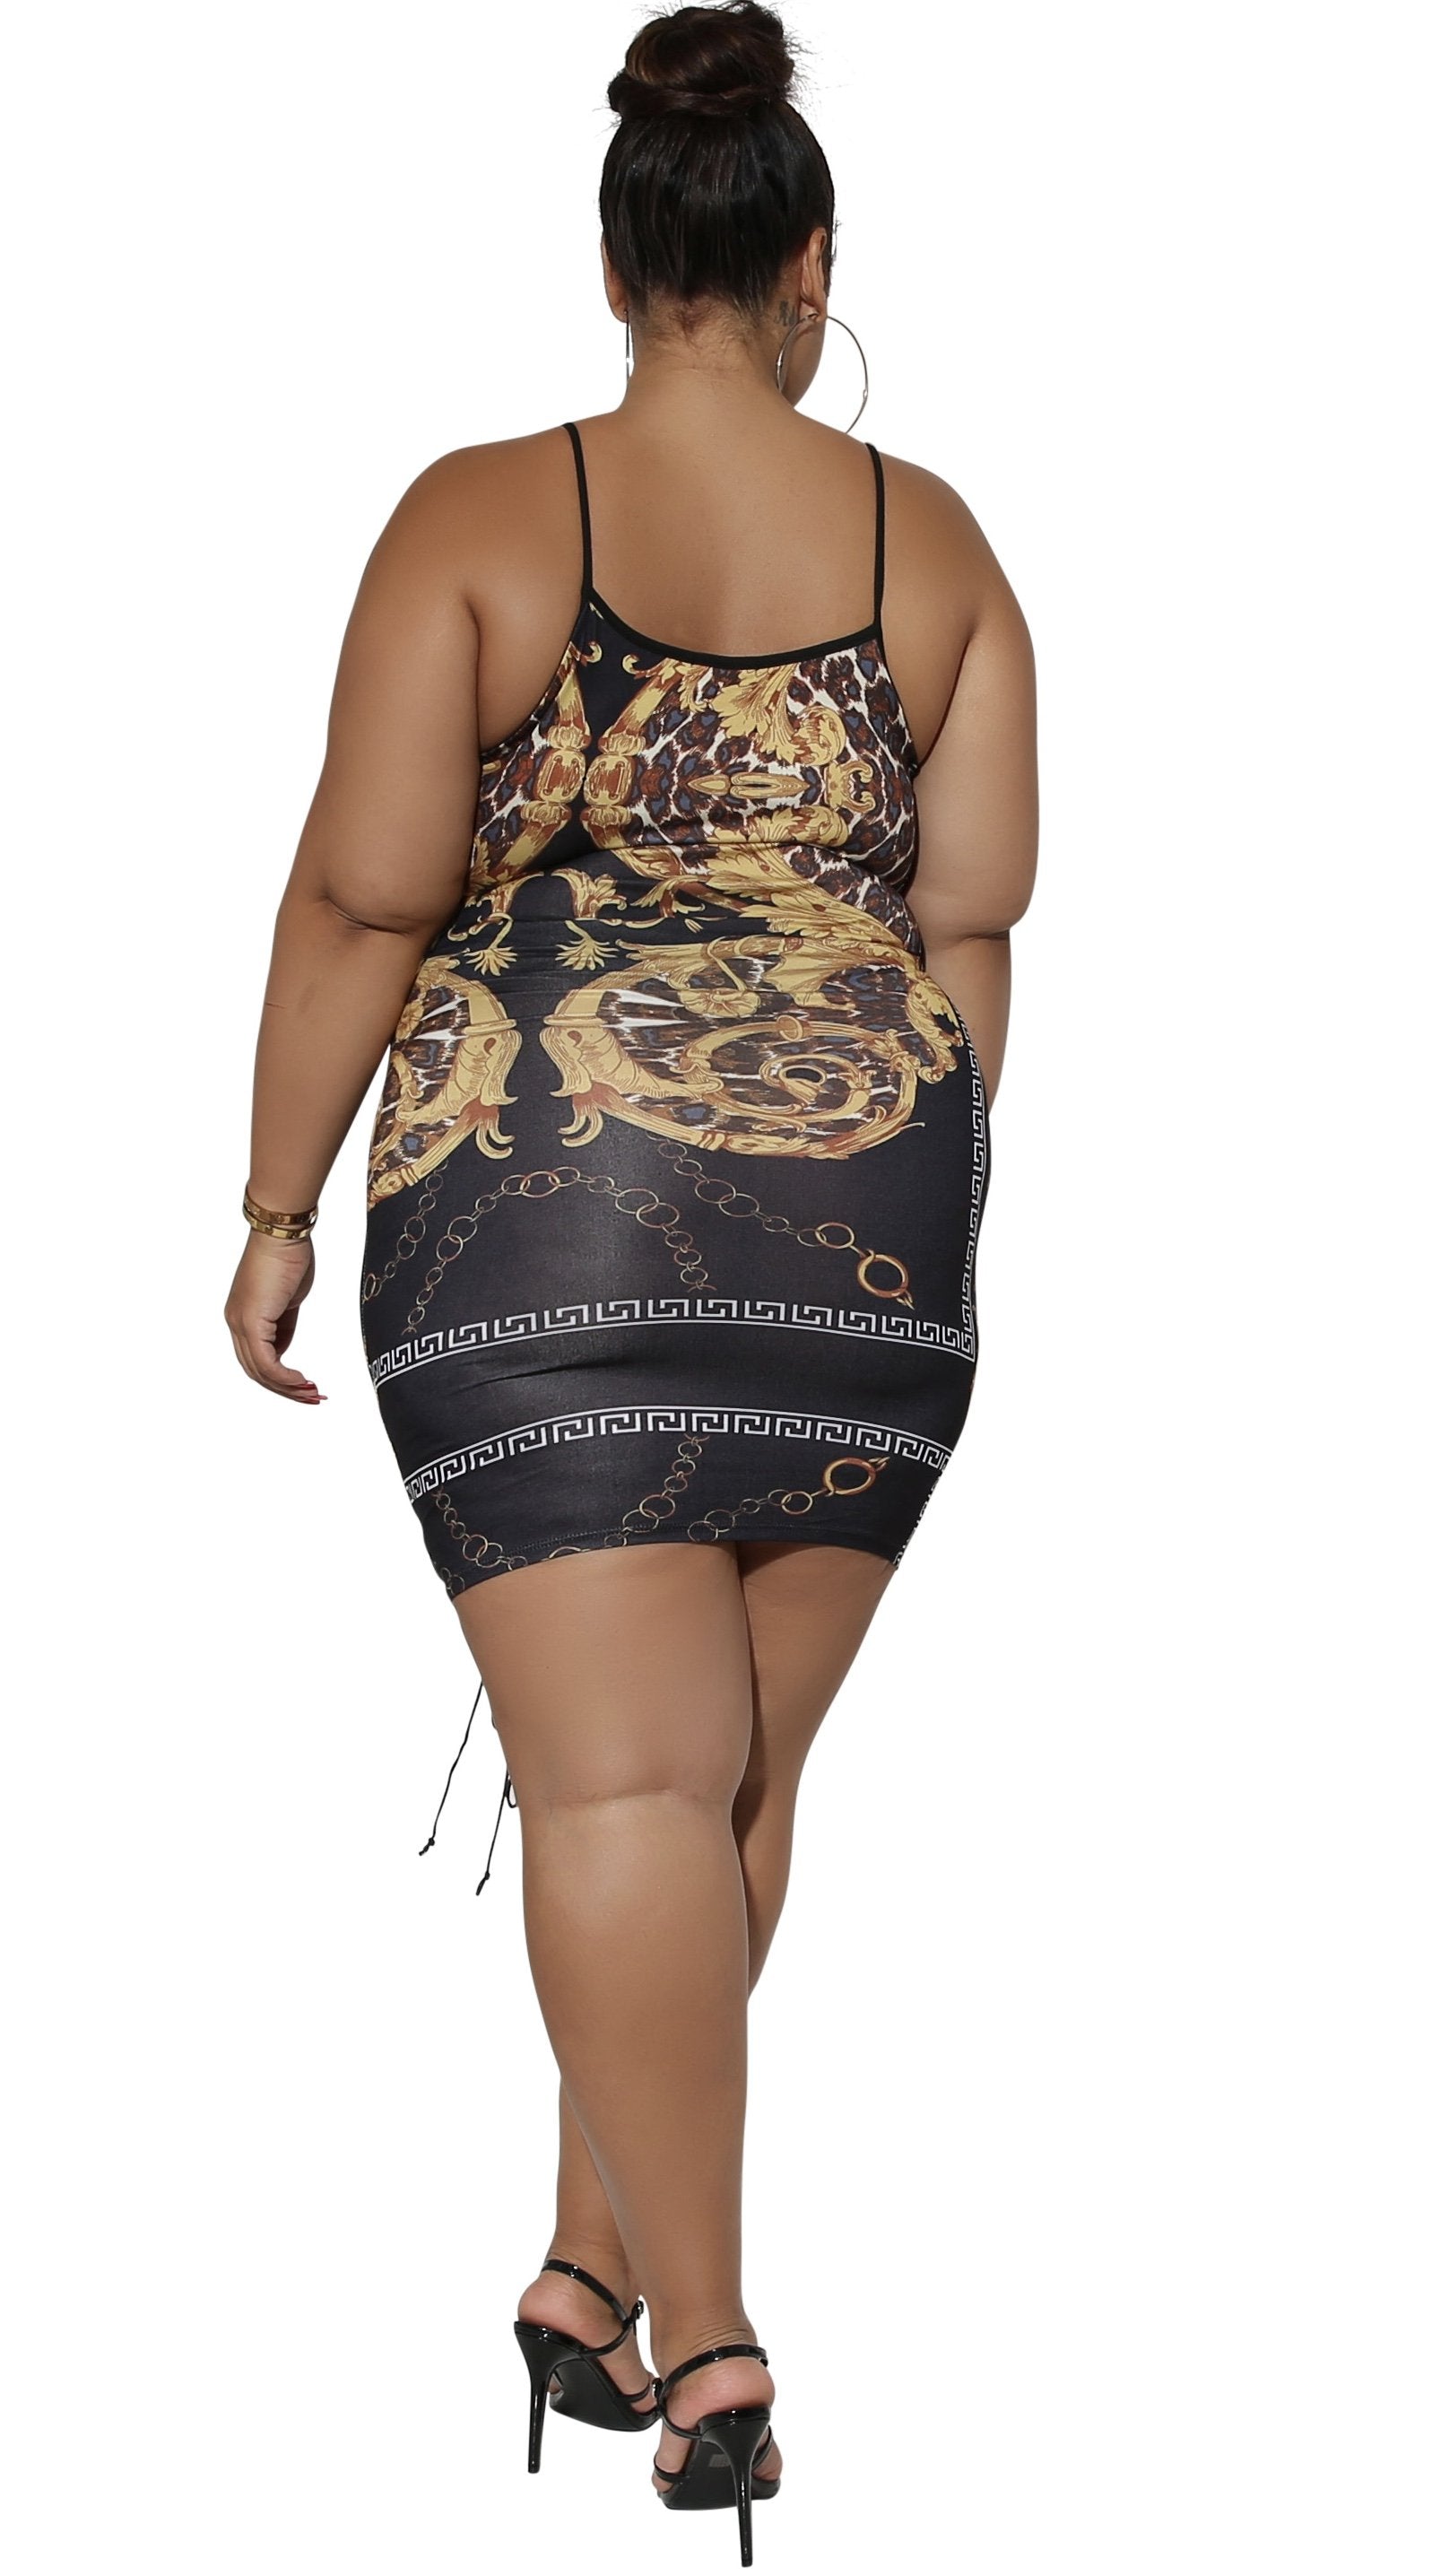 Best of Exotic plus size clothing